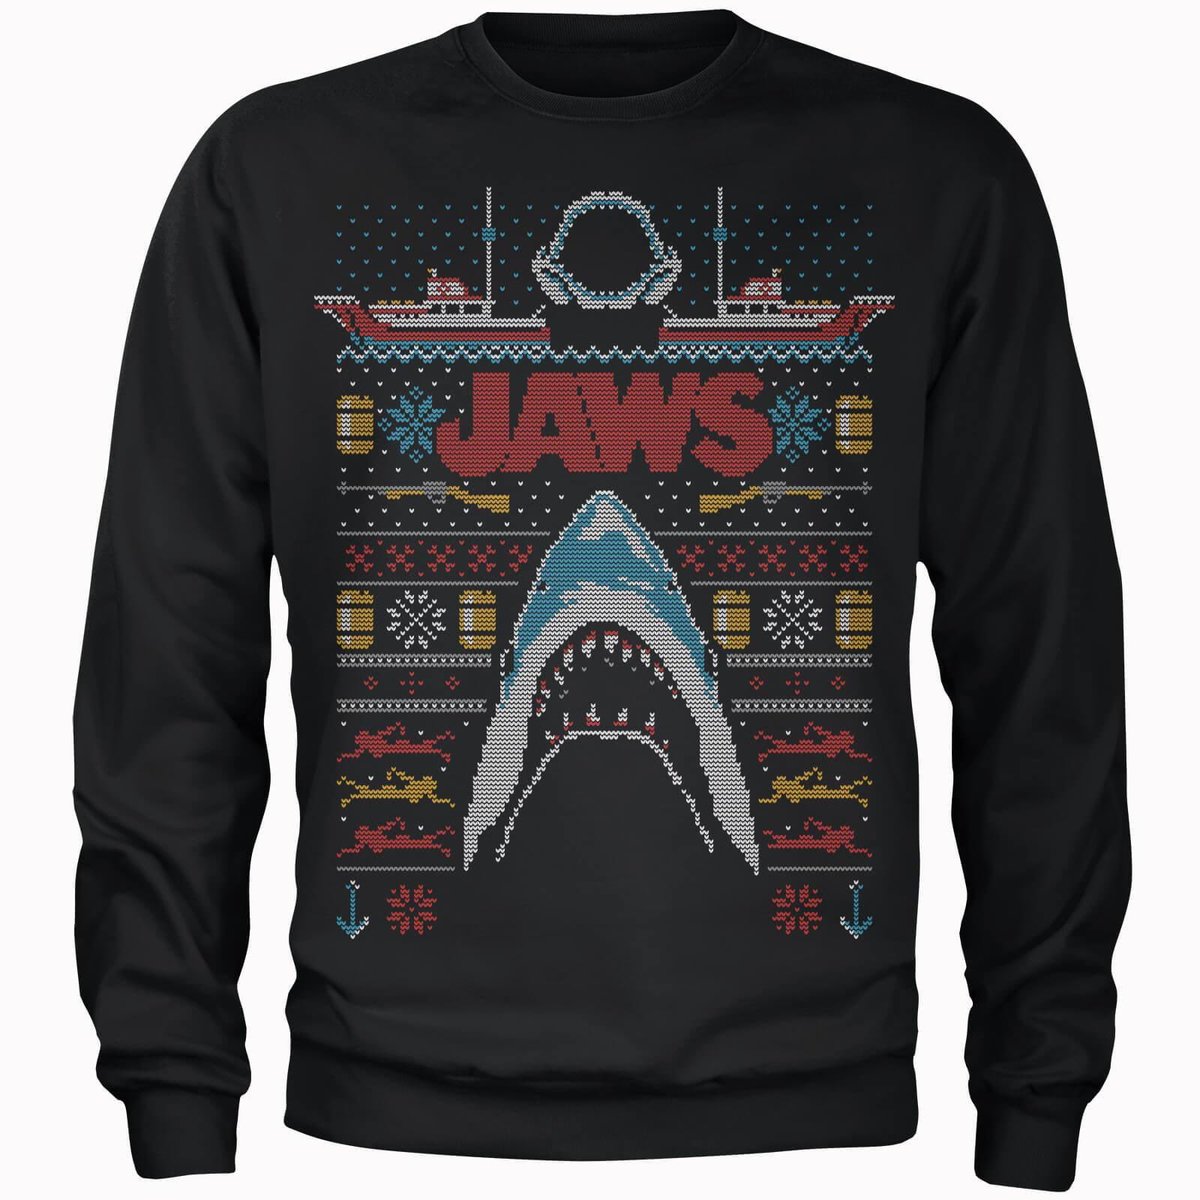 Happy #ChristmasJumperDay 😃 

Check out our #Jawsmas Jumper guide here: bit.ly/3n8tDPb

#jaws #sharks #xmasjumpers #ChristmasJumpers